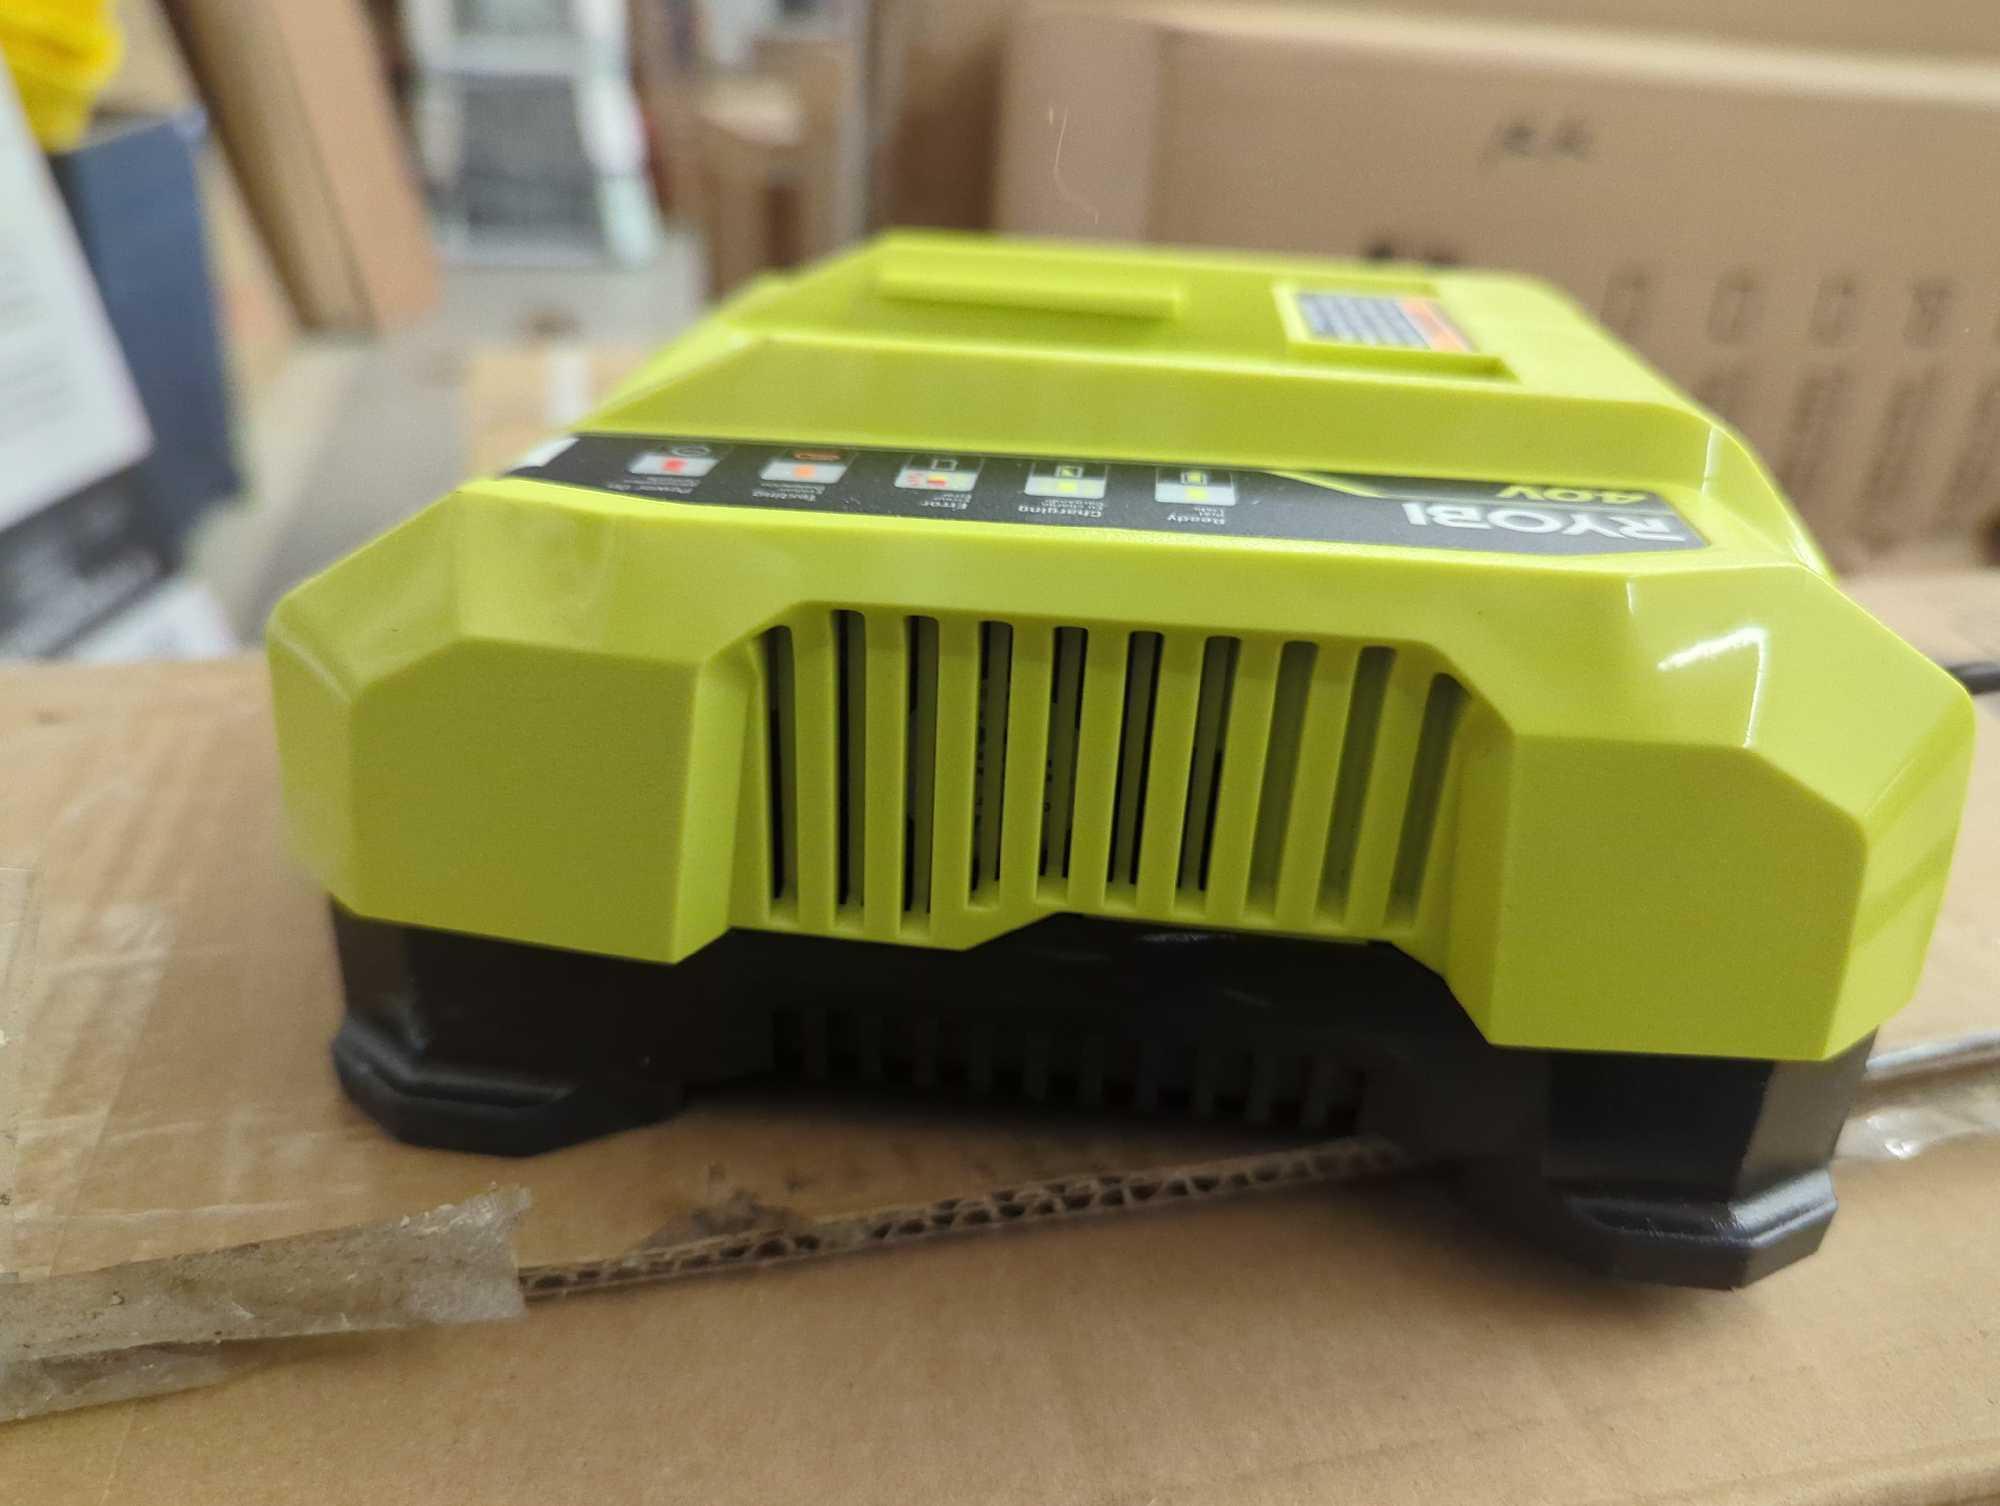 RYOBI 40V Lithium-Ion Rapid Charger, Model OP406VNM, Retail Price $119, Appears to be Used, What You